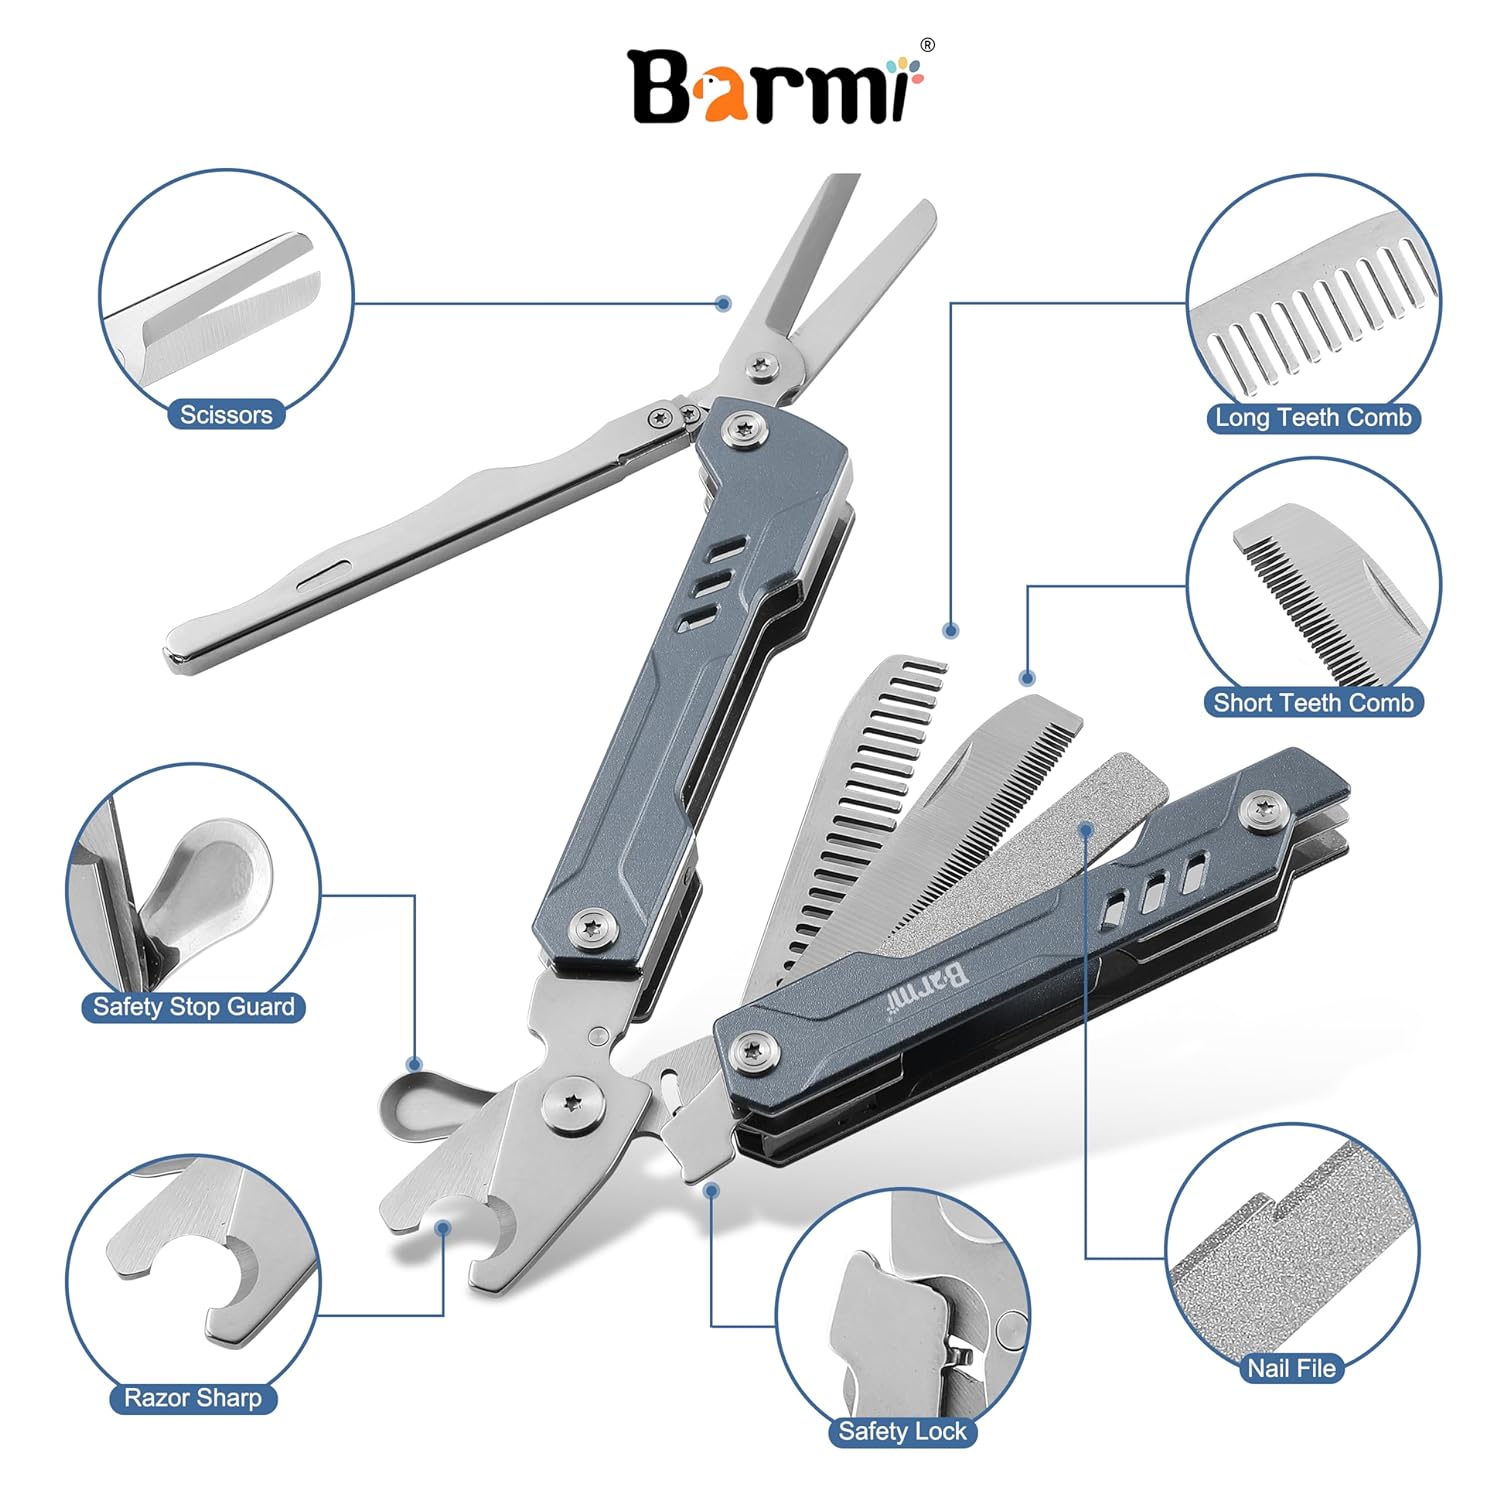 BARMI Dog Nail Clipper with Pet Grooming Scissors and Fine Hair Cleaning Comb, Dog Nail File, 6-in-1 Multitool for Products Suitable for Medium to Large Dogs and Cats